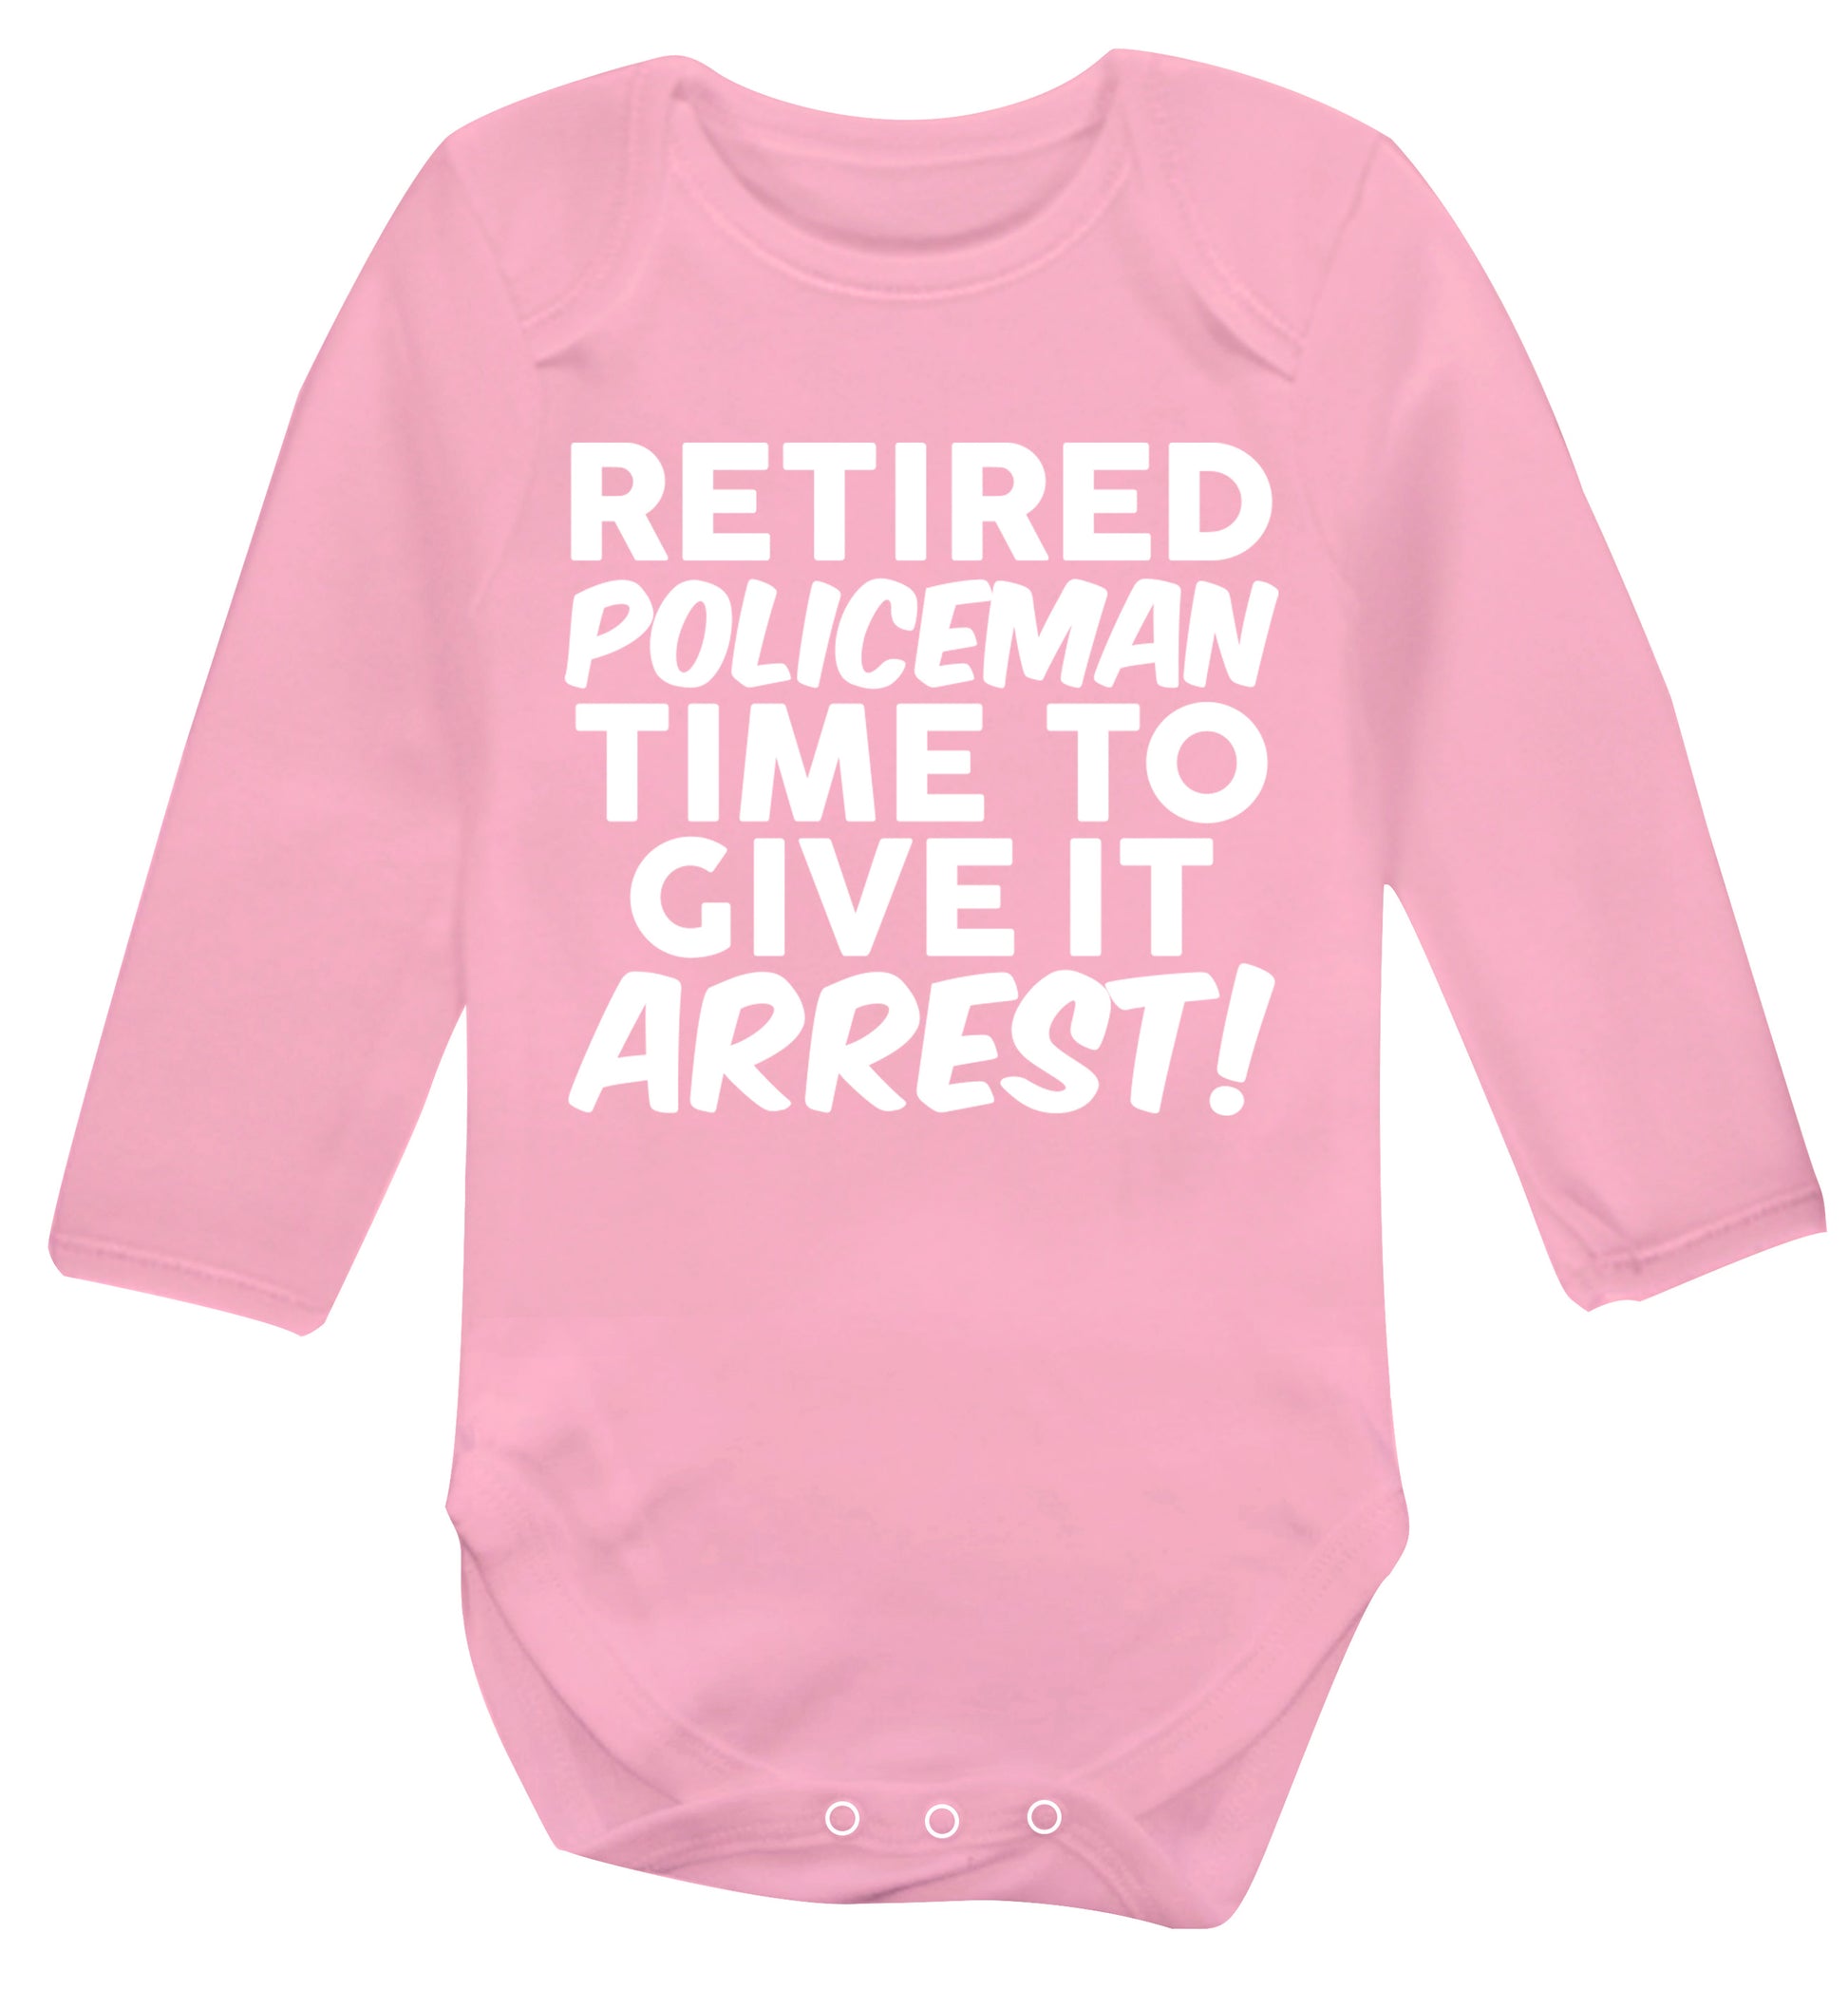 Retired policeman give it arresst! Baby Vest long sleeved pale pink 6-12 months